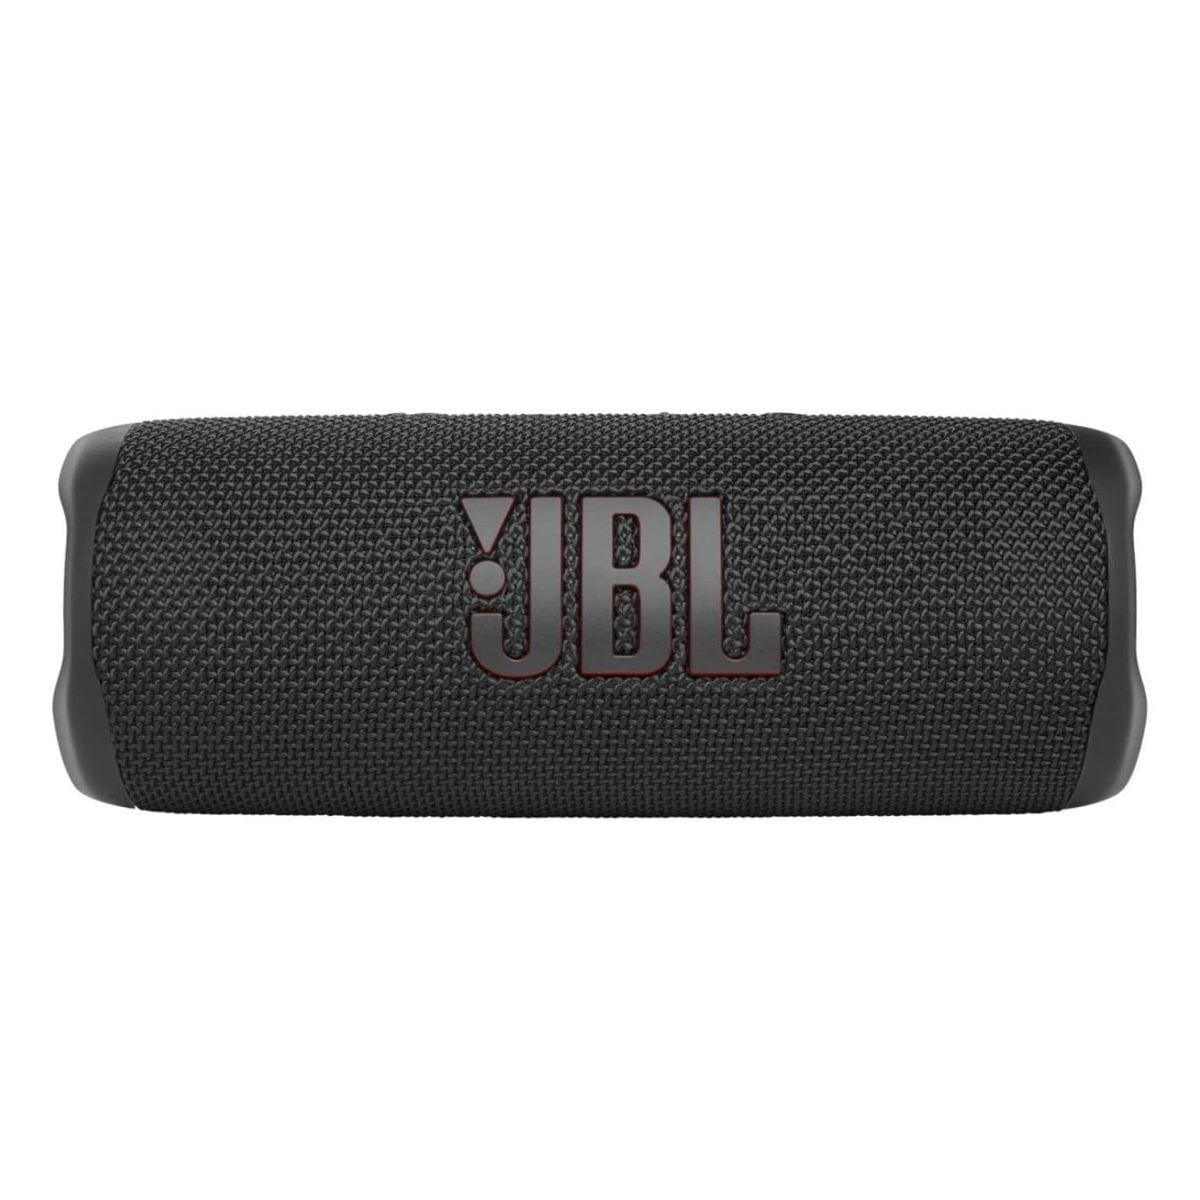 71Vs8Coyugl. Ac Sl1500 Jbl &Lt;H1&Gt;Jbl Flip 6 Portable Bluetooth Wireless Speaker - Black&Lt;/H1&Gt; Https://Www.youtube.com/Watch?V=F6Waogaxhme Bold Sound For Every Adventure. Your Adventure. Your Soundtrack. The Bold New Jbl Flip 6 Delivers Powerful Jbl Original Pro Sound With Exceptional Clarity Thanks To Its 2-Way Speaker System Consisting Of An Optimized Racetrack-Shaped Driver, Separate Tweeter, And Dual Pumping Bass Radiators. This Big-Sounding, Yet Easy To Carry Speaker Is Waterproof And Dustproof, So You Can Take It Anywhere In Any Weather. And With 12 Hours Of Battery Life, You Can Party ‘Til The Sun Goes Down—Or Comes Up—Wherever The Music Moves You. Use Partyboost To Link Multiple Compatible Speakers. The Flip 6 Comes In A Variety Of Cool Colors. Jbl Flip5 Grey Jbl Flip 6 Portable Bluetooth Wireless Speaker - Black